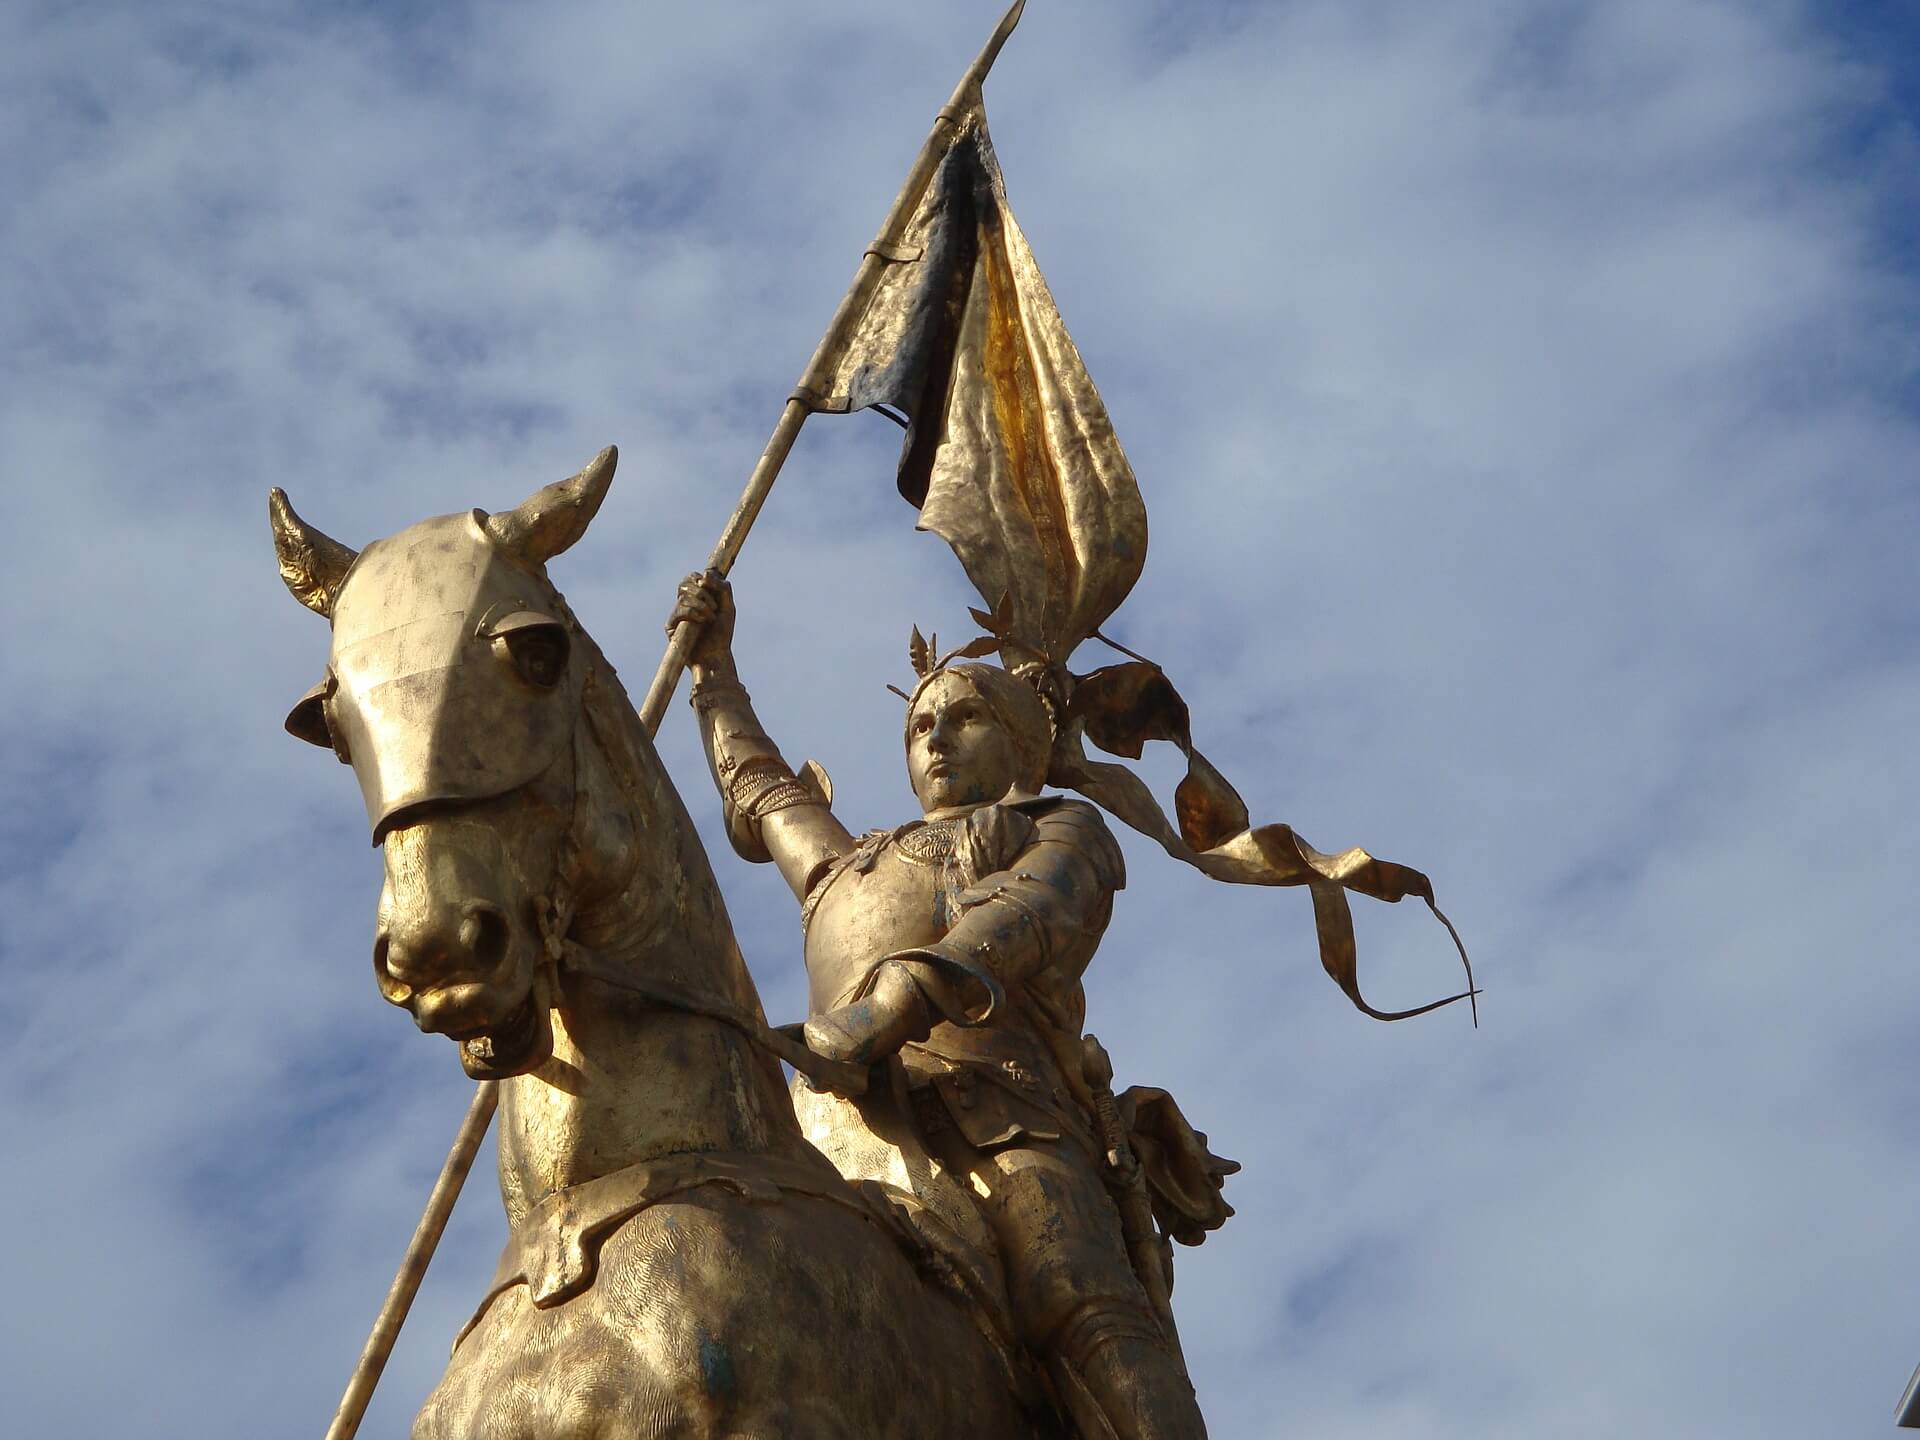 Macron doubtlessly inspired by natinoal hero Jeanne d'Arc, profiling himself as a young, eloquent doer that will shake things up. Source: Pixabay